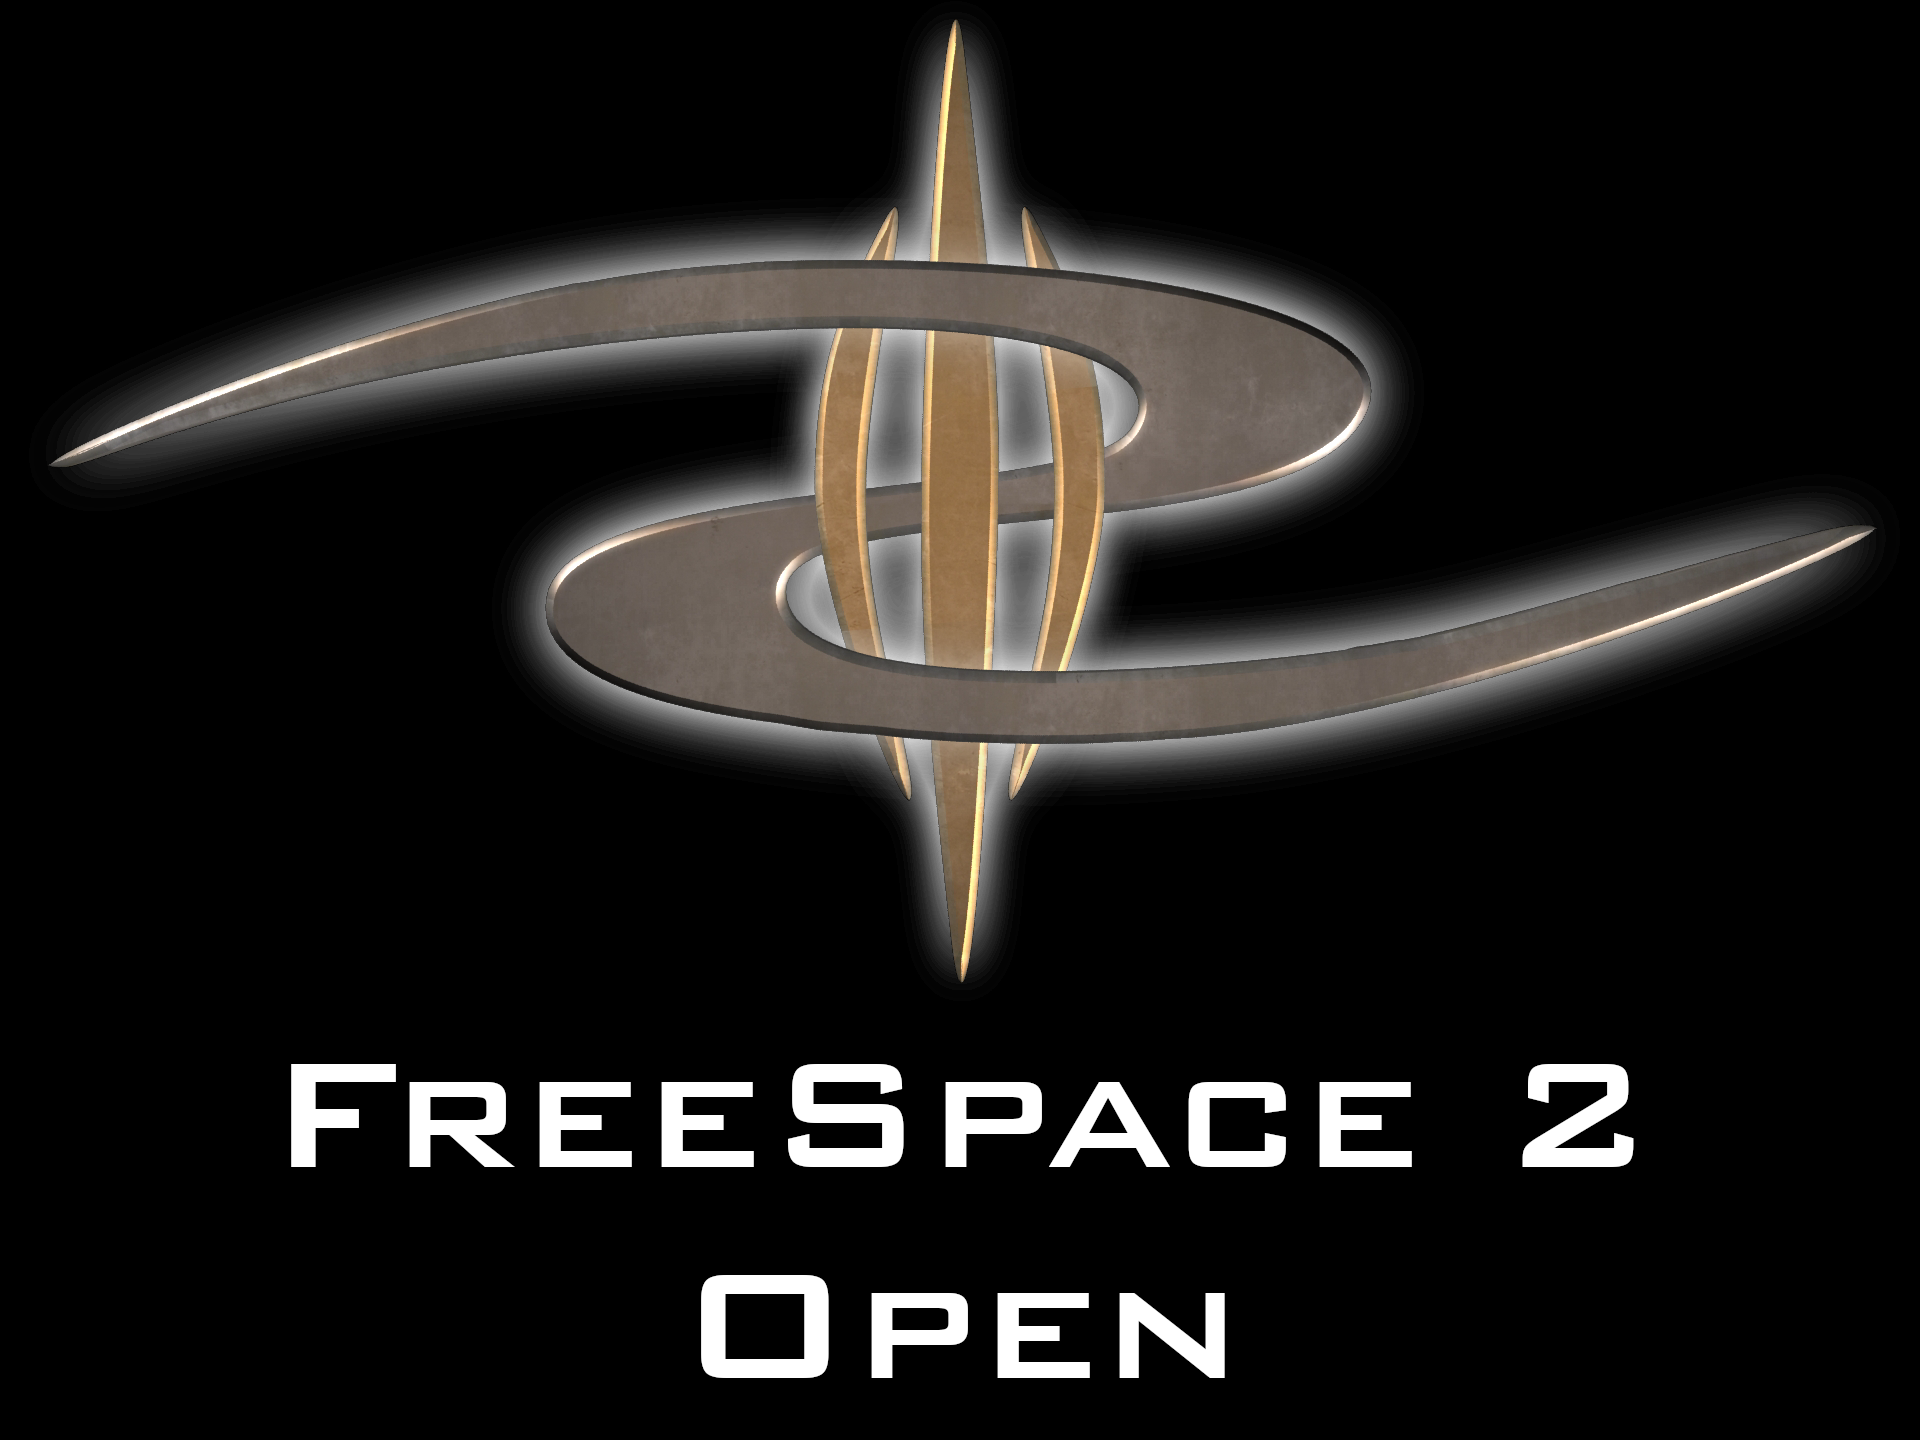 fs2open/code/freespace2/freespace.cpp at master · ngld/fs2open